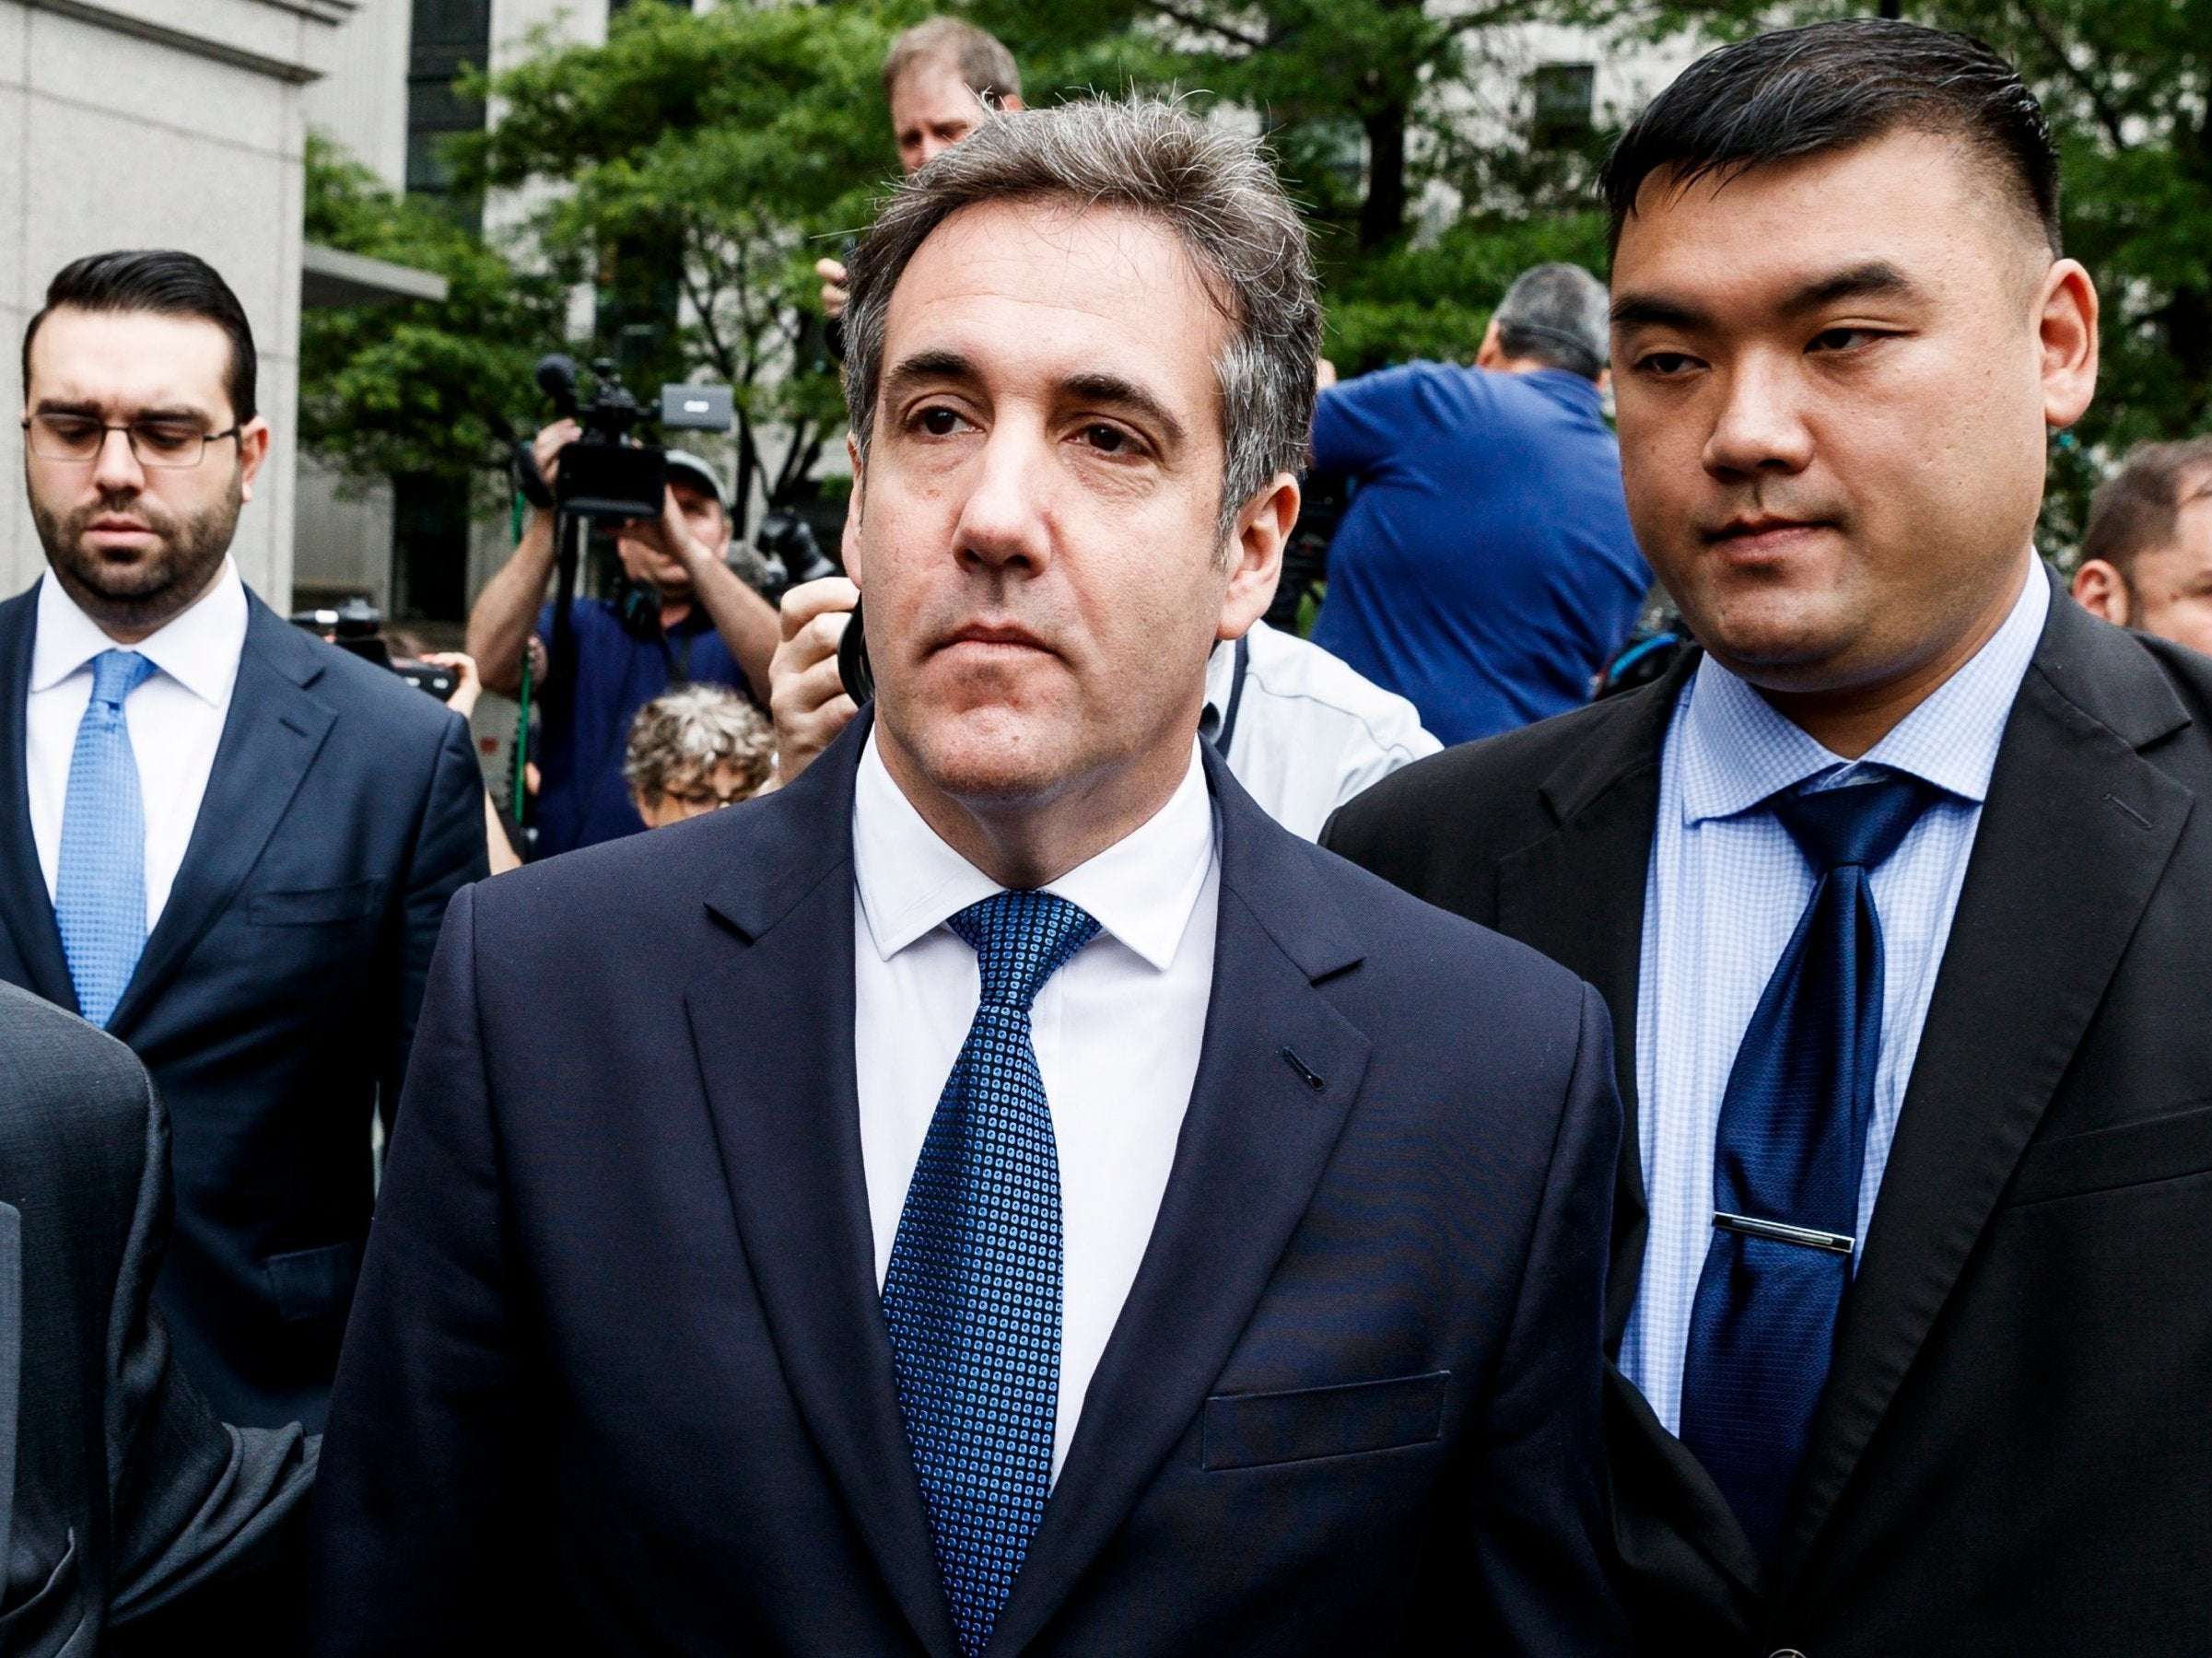 image for Michael Cohen says Donald Trump will flee to Mar-a-Lago and never return to White House